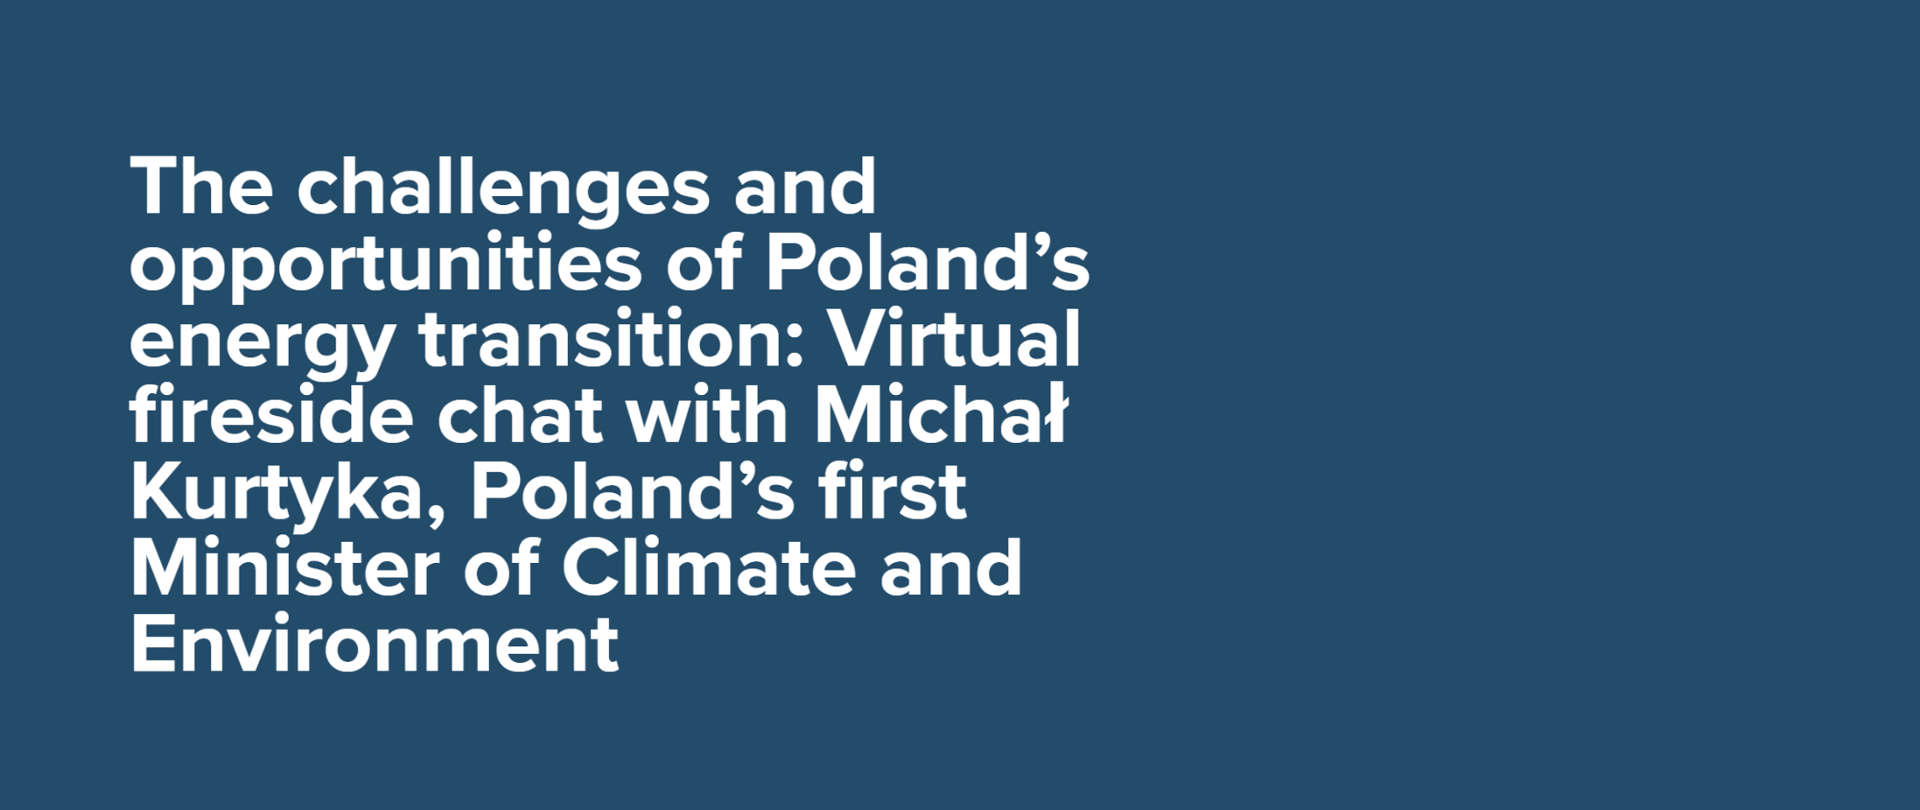 Webinar "The challenges and opportunities of Poland’s energy transition"